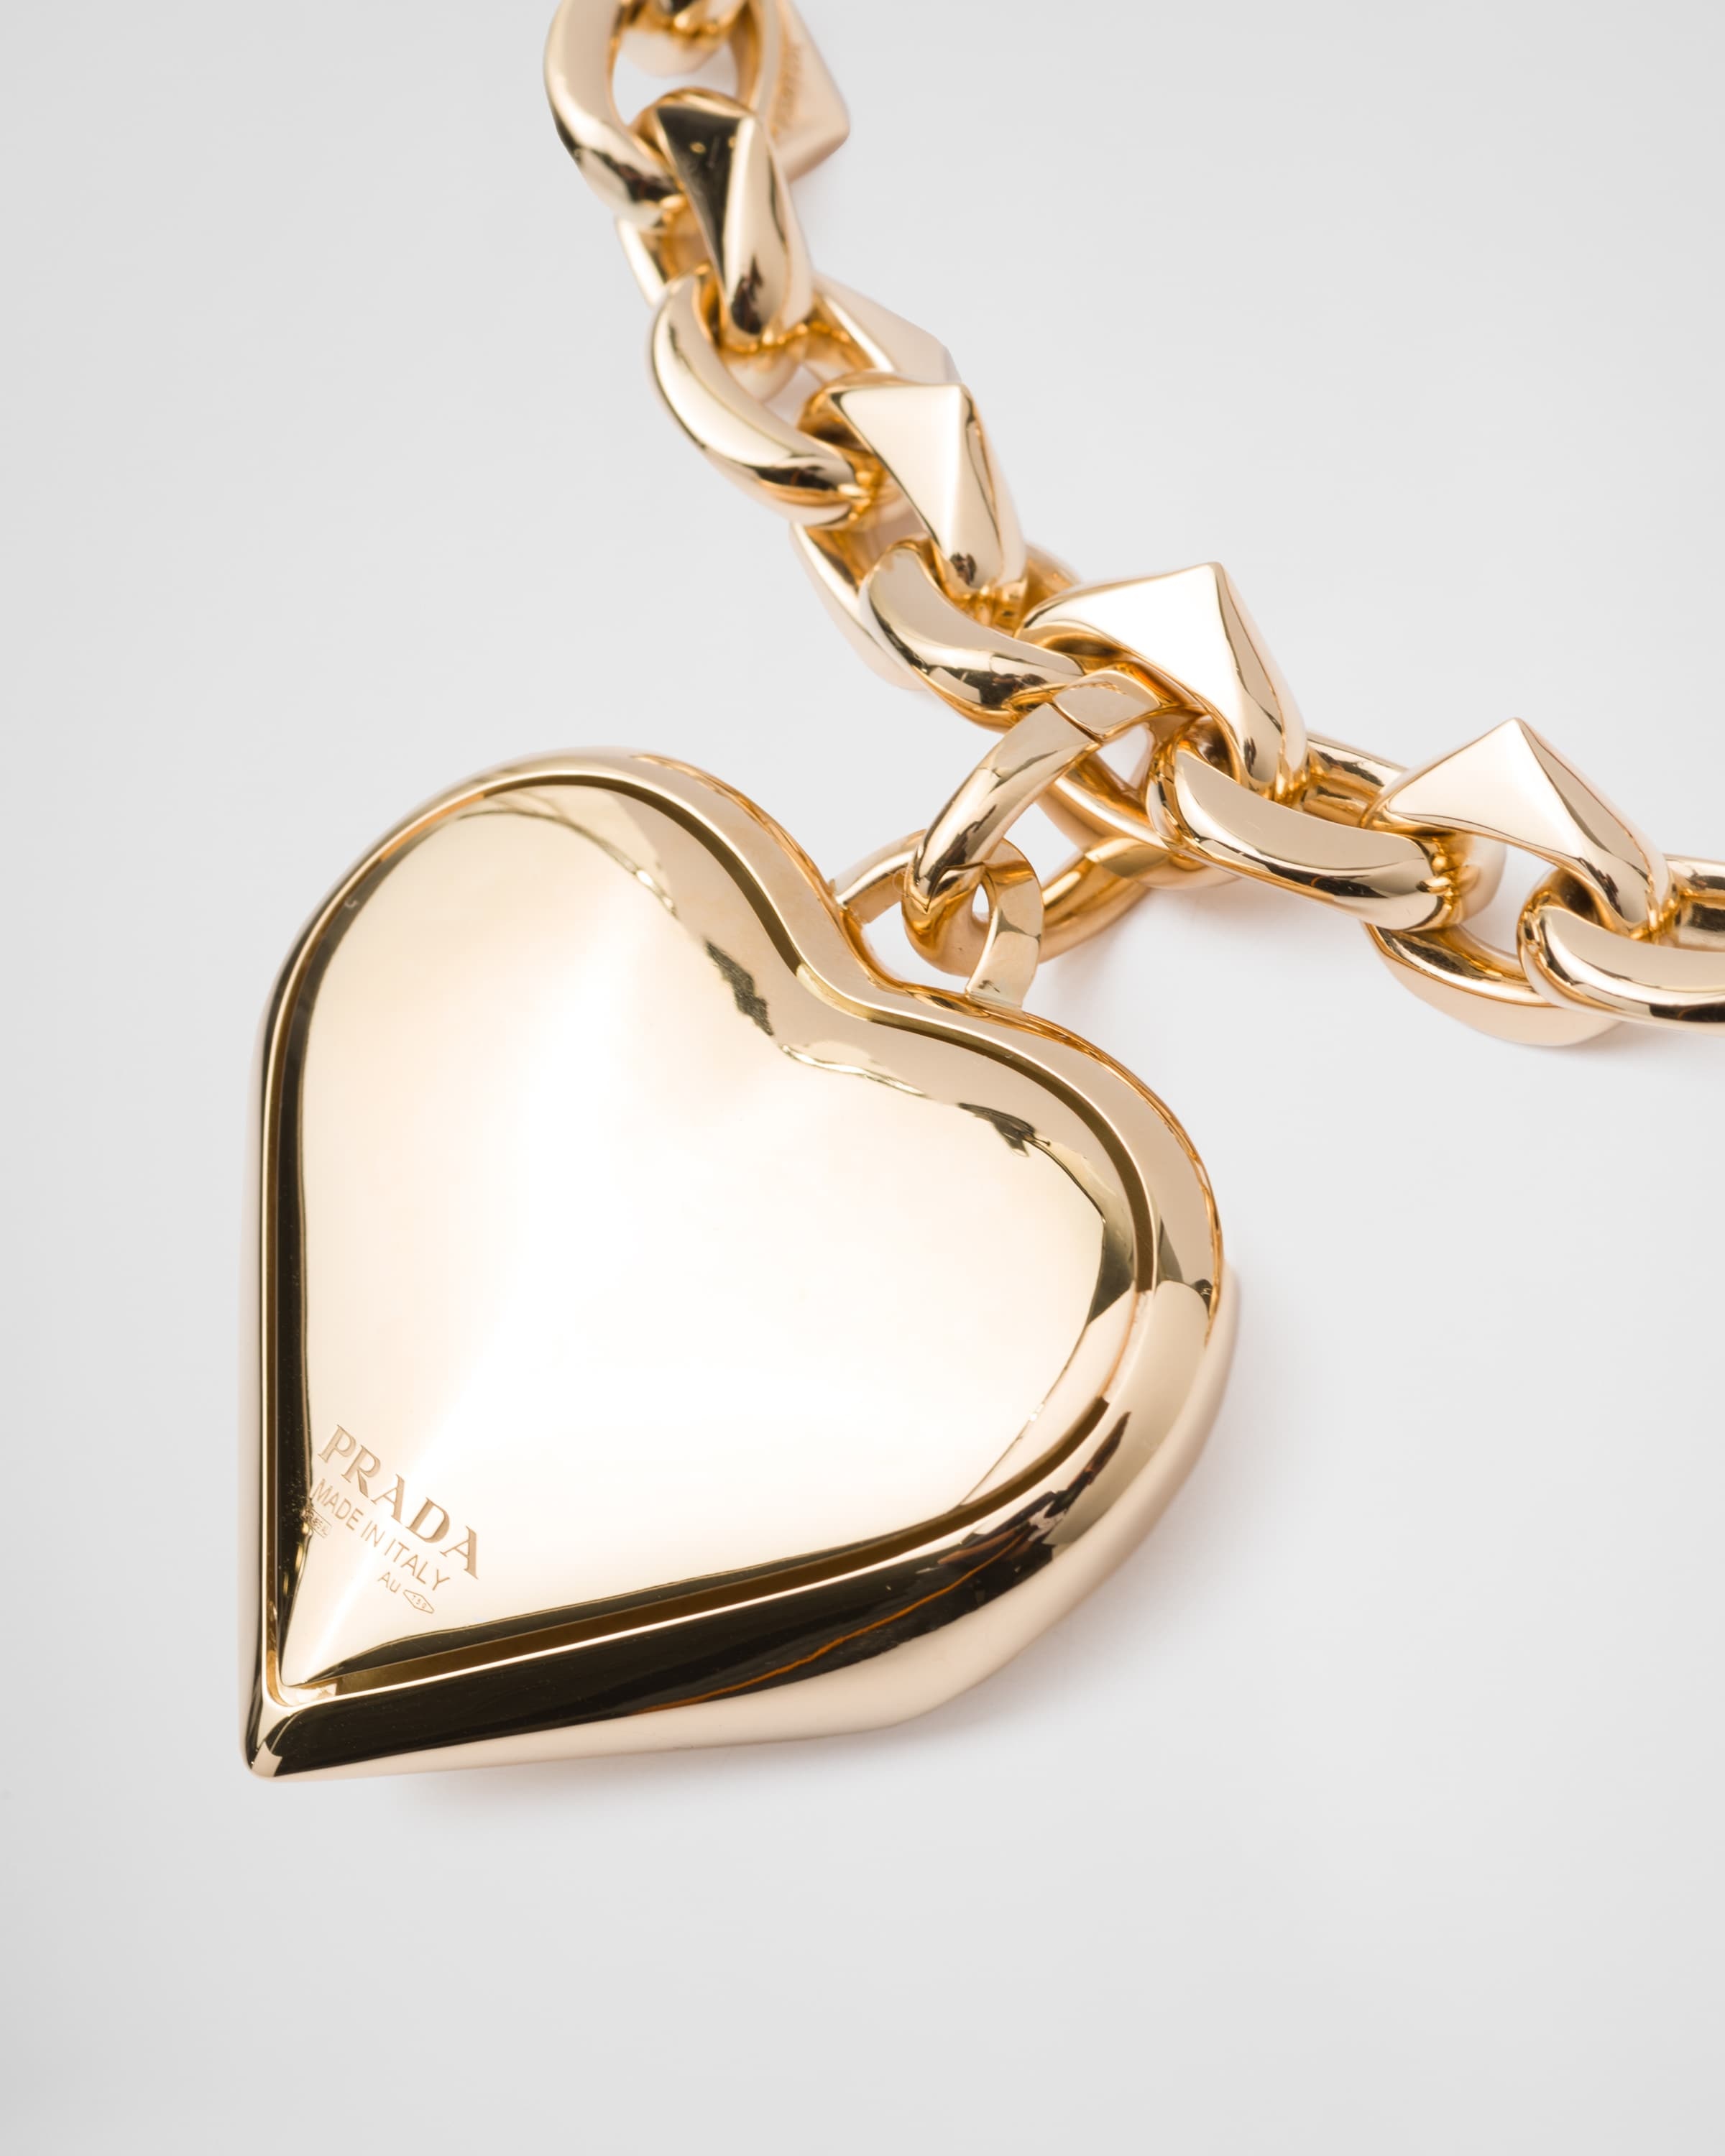 Eternal Gold large pendant necklace in yellow gold - 4